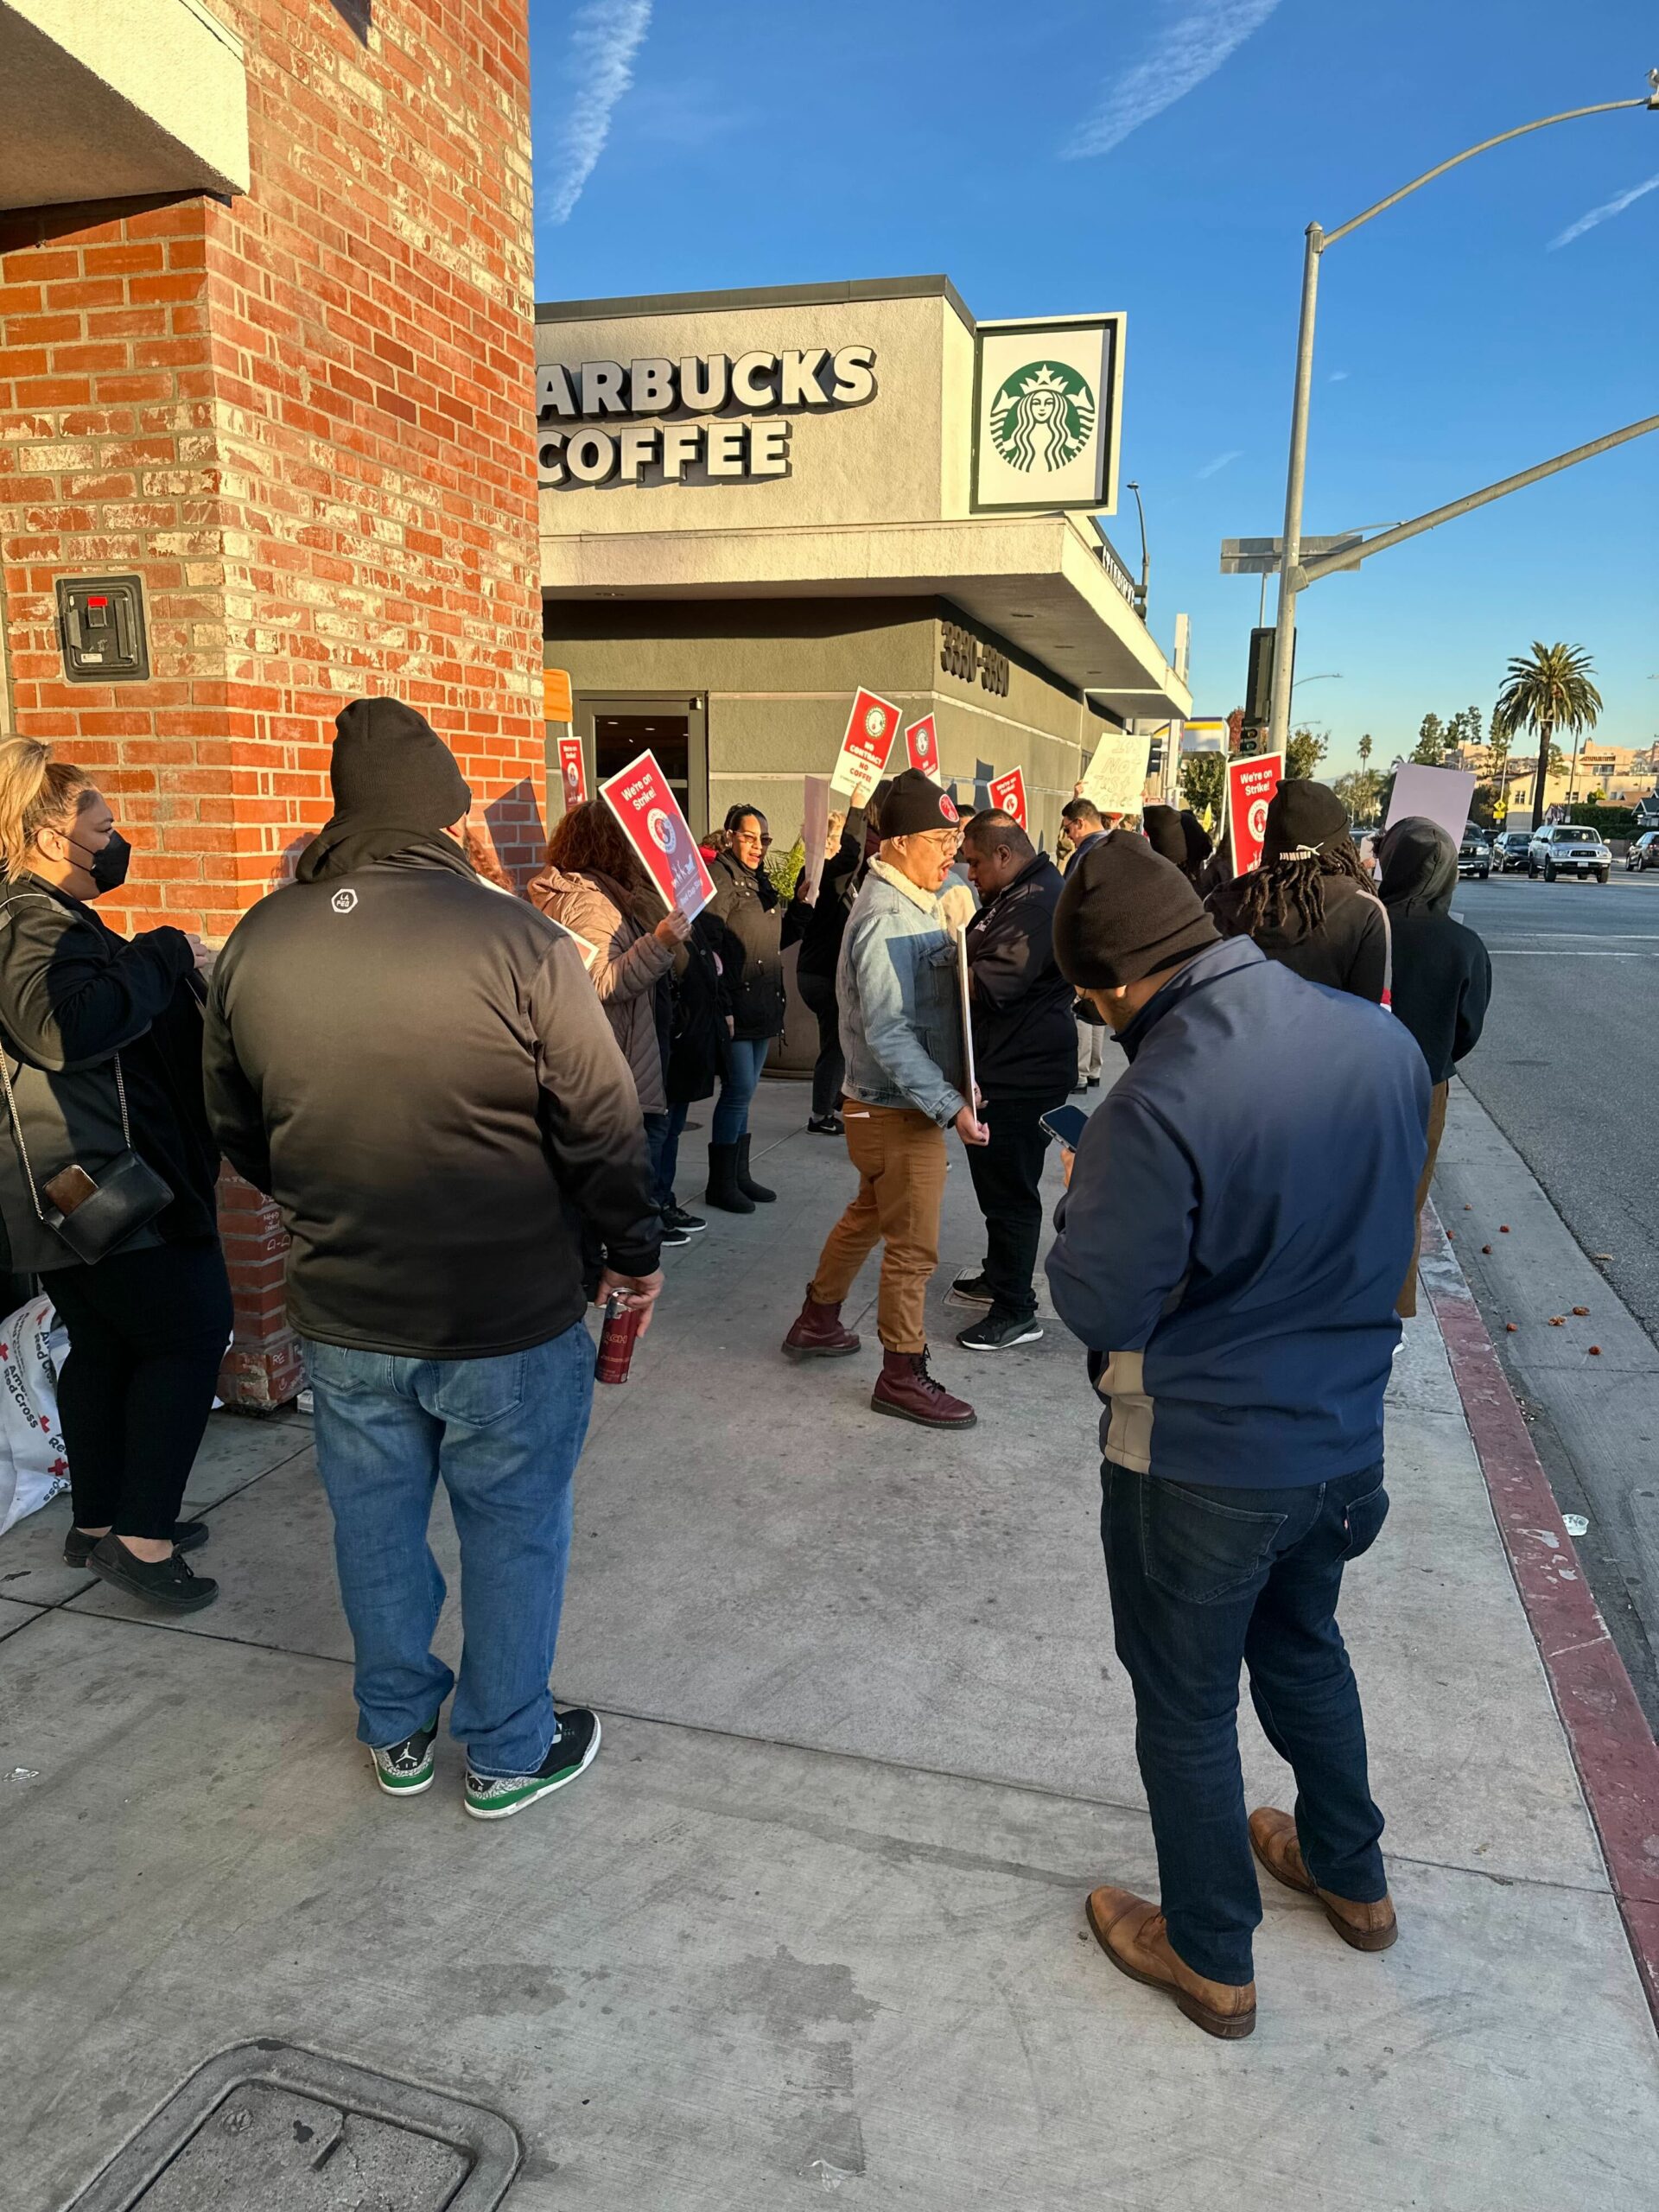 Workers hold red picket signs and march in a circle outside a Starbucks store.